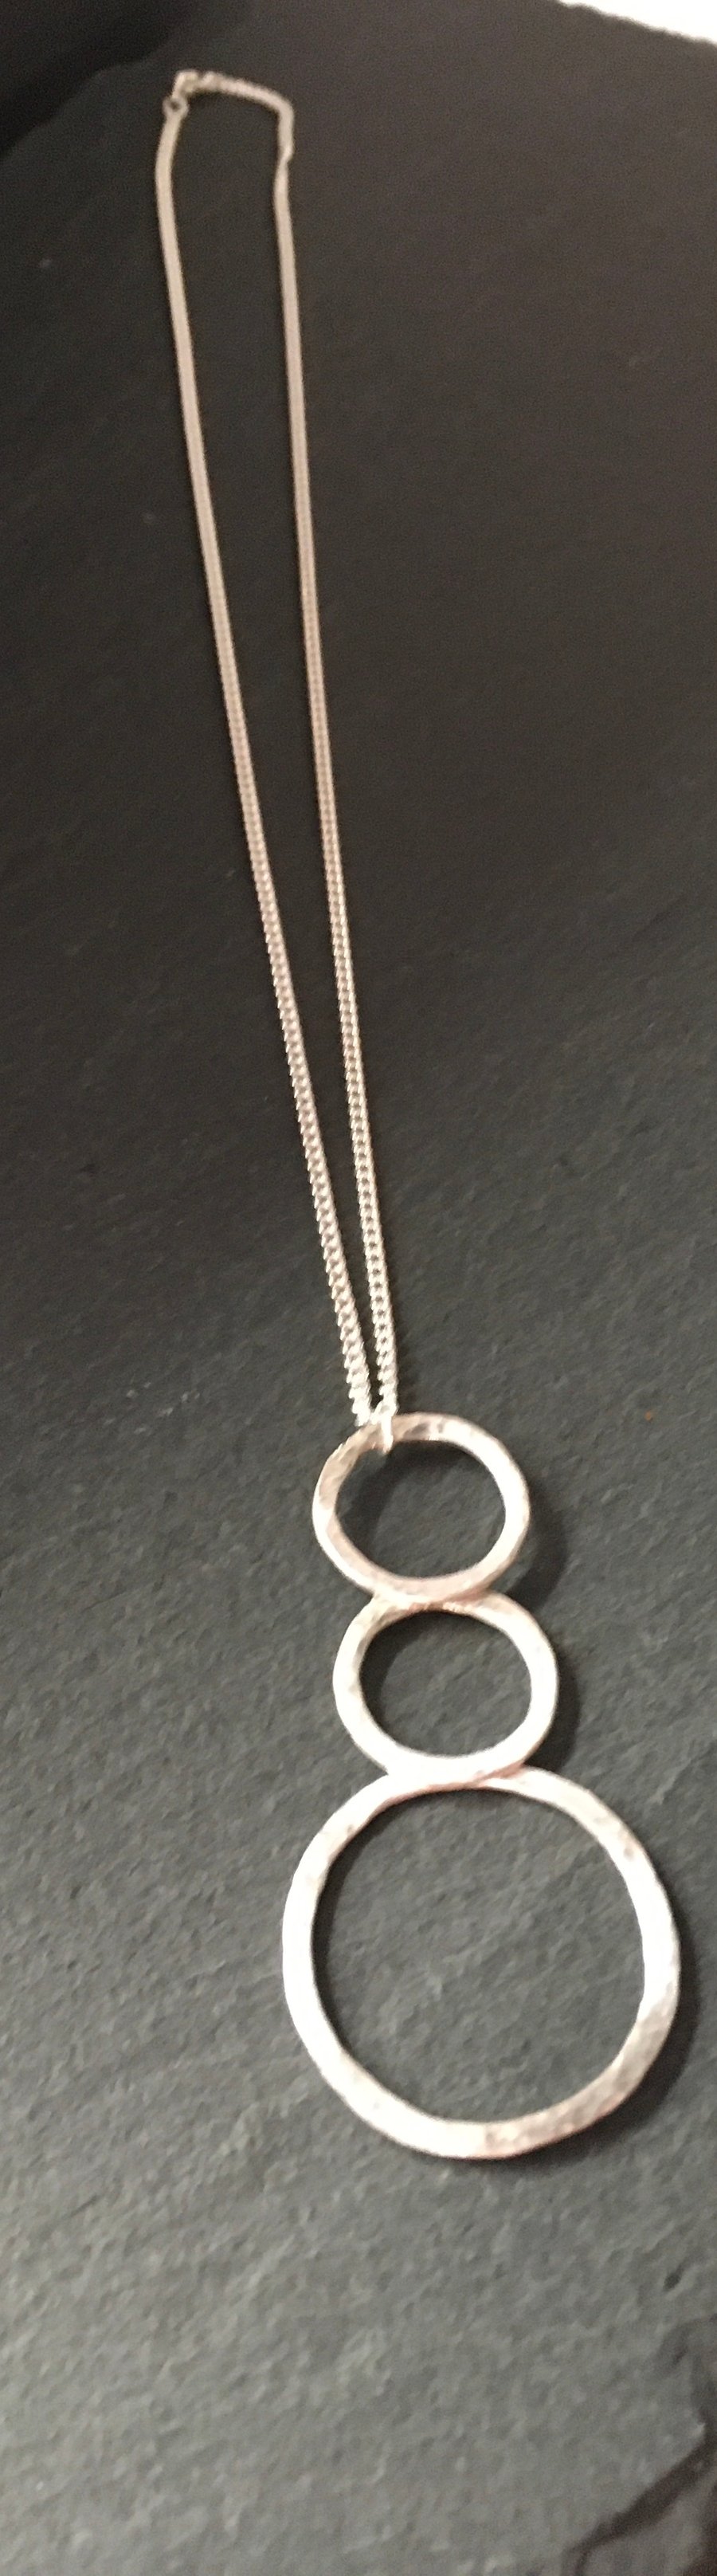 Circles Sterling Silver Necklace